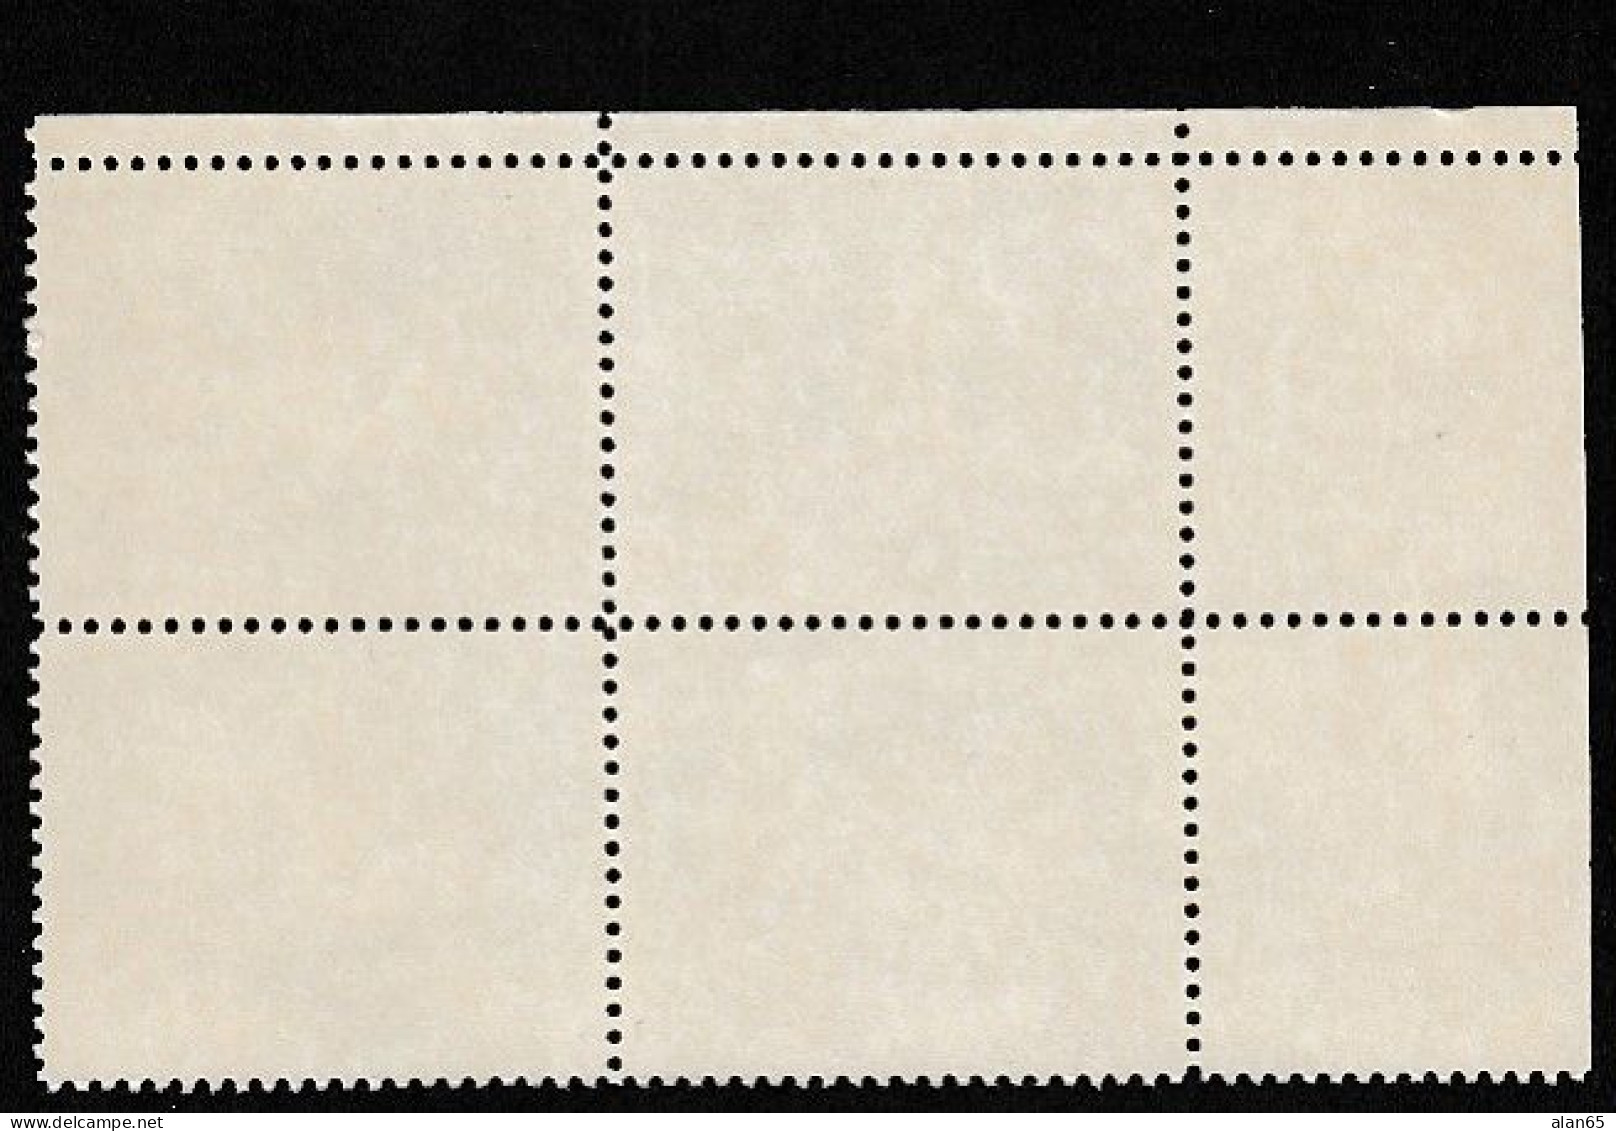 Sc#2420, Letter Carriers 25-cent 1989 Issue, Plate # Block Of 4 MNH US Postage Stamps - Plate Blocks & Sheetlets